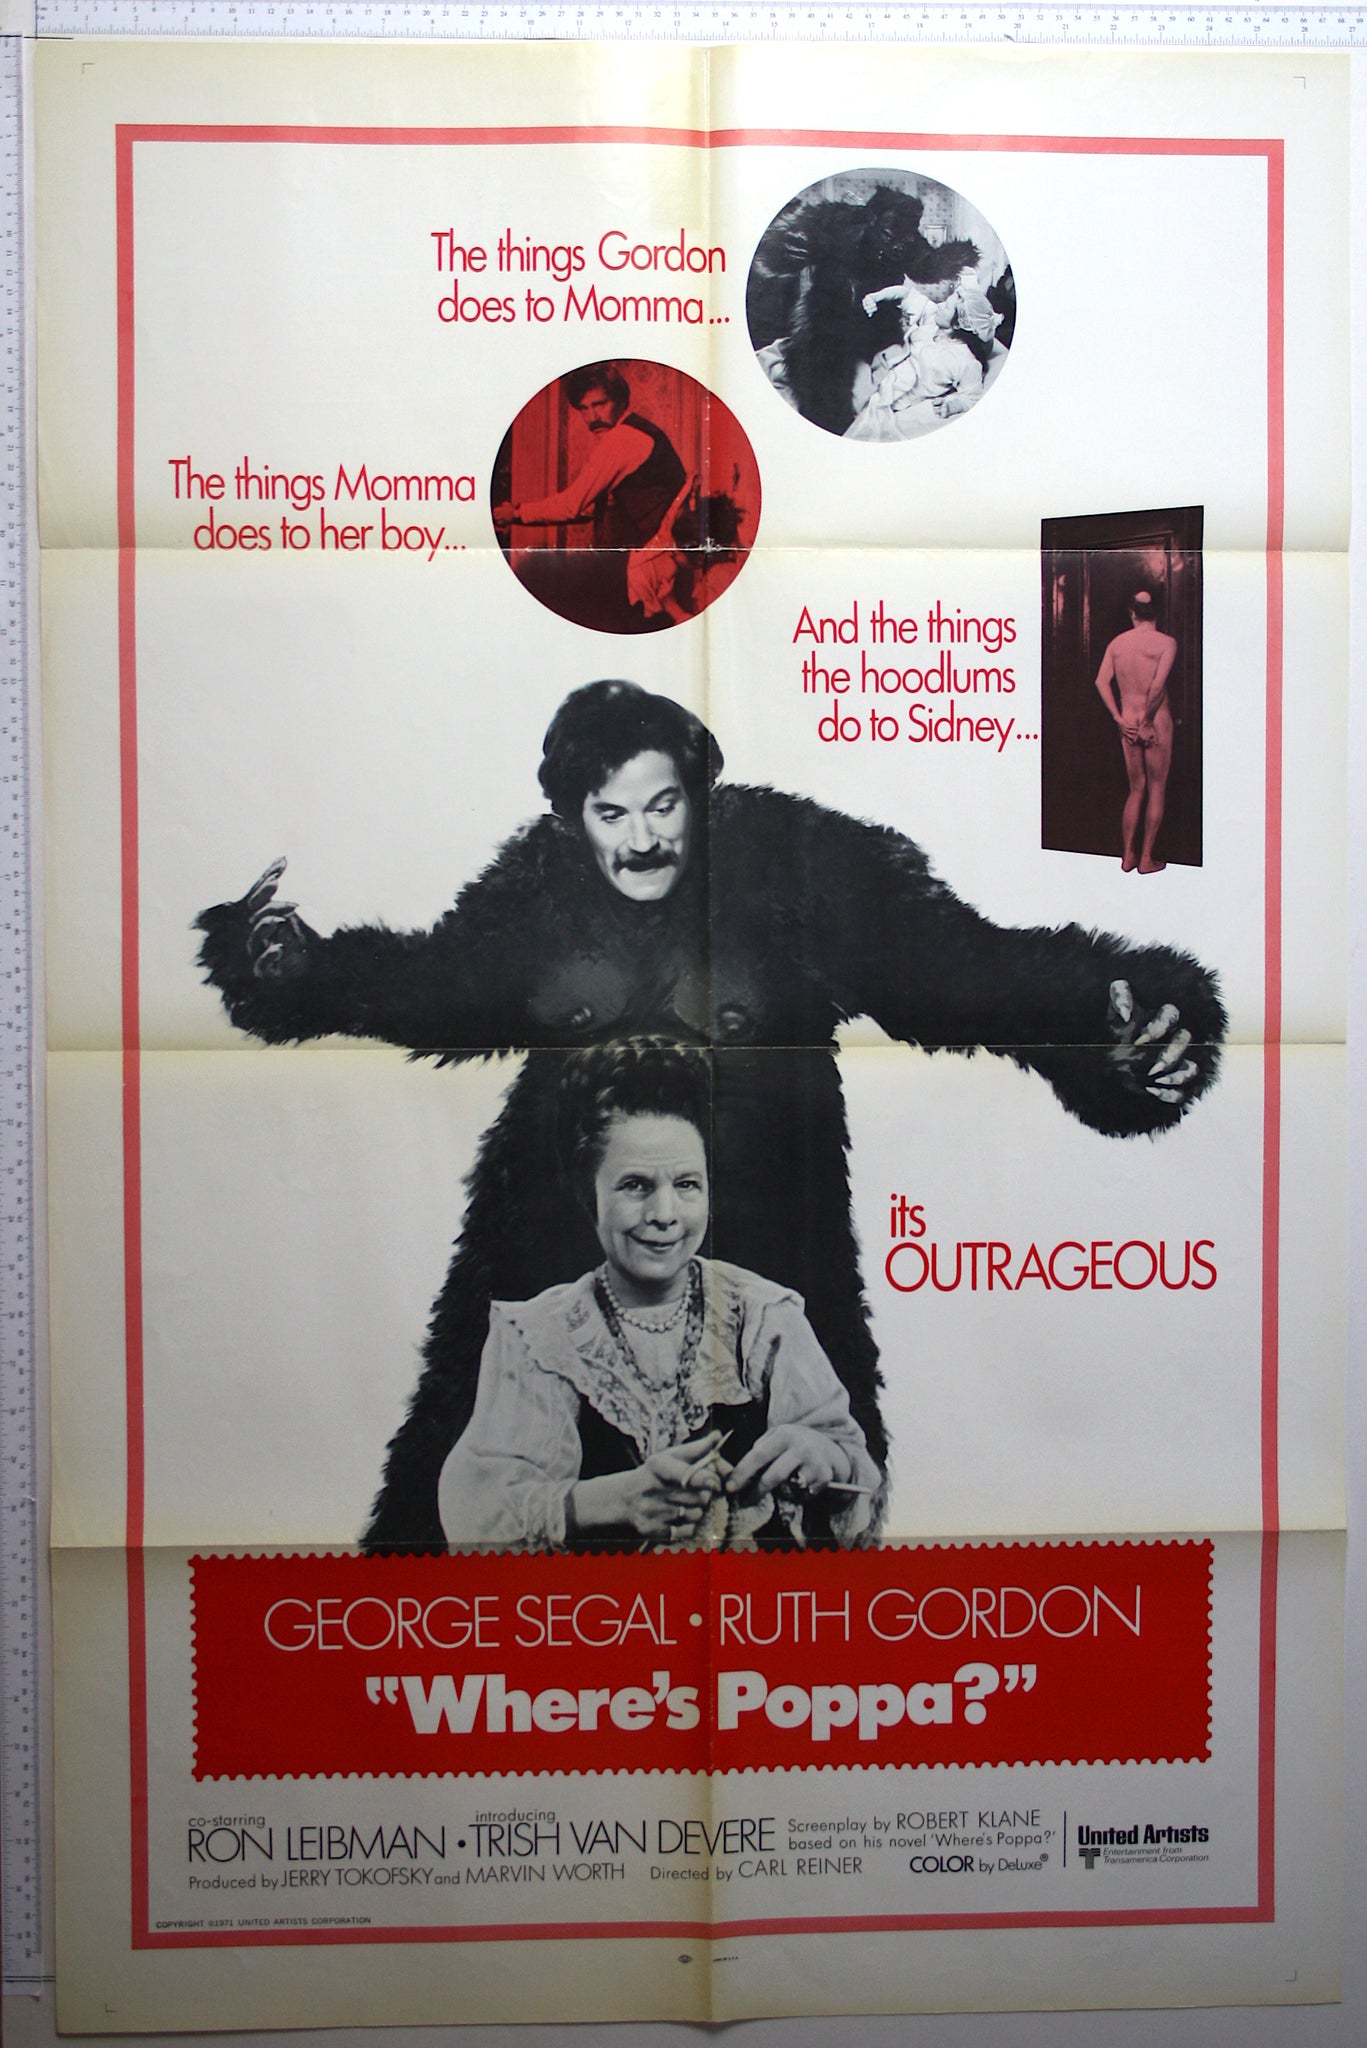 Photo of Segal in gorilla suit with Gordon, inset circles of gorilla scare, Segal with trousers down, and naked brother locked out.